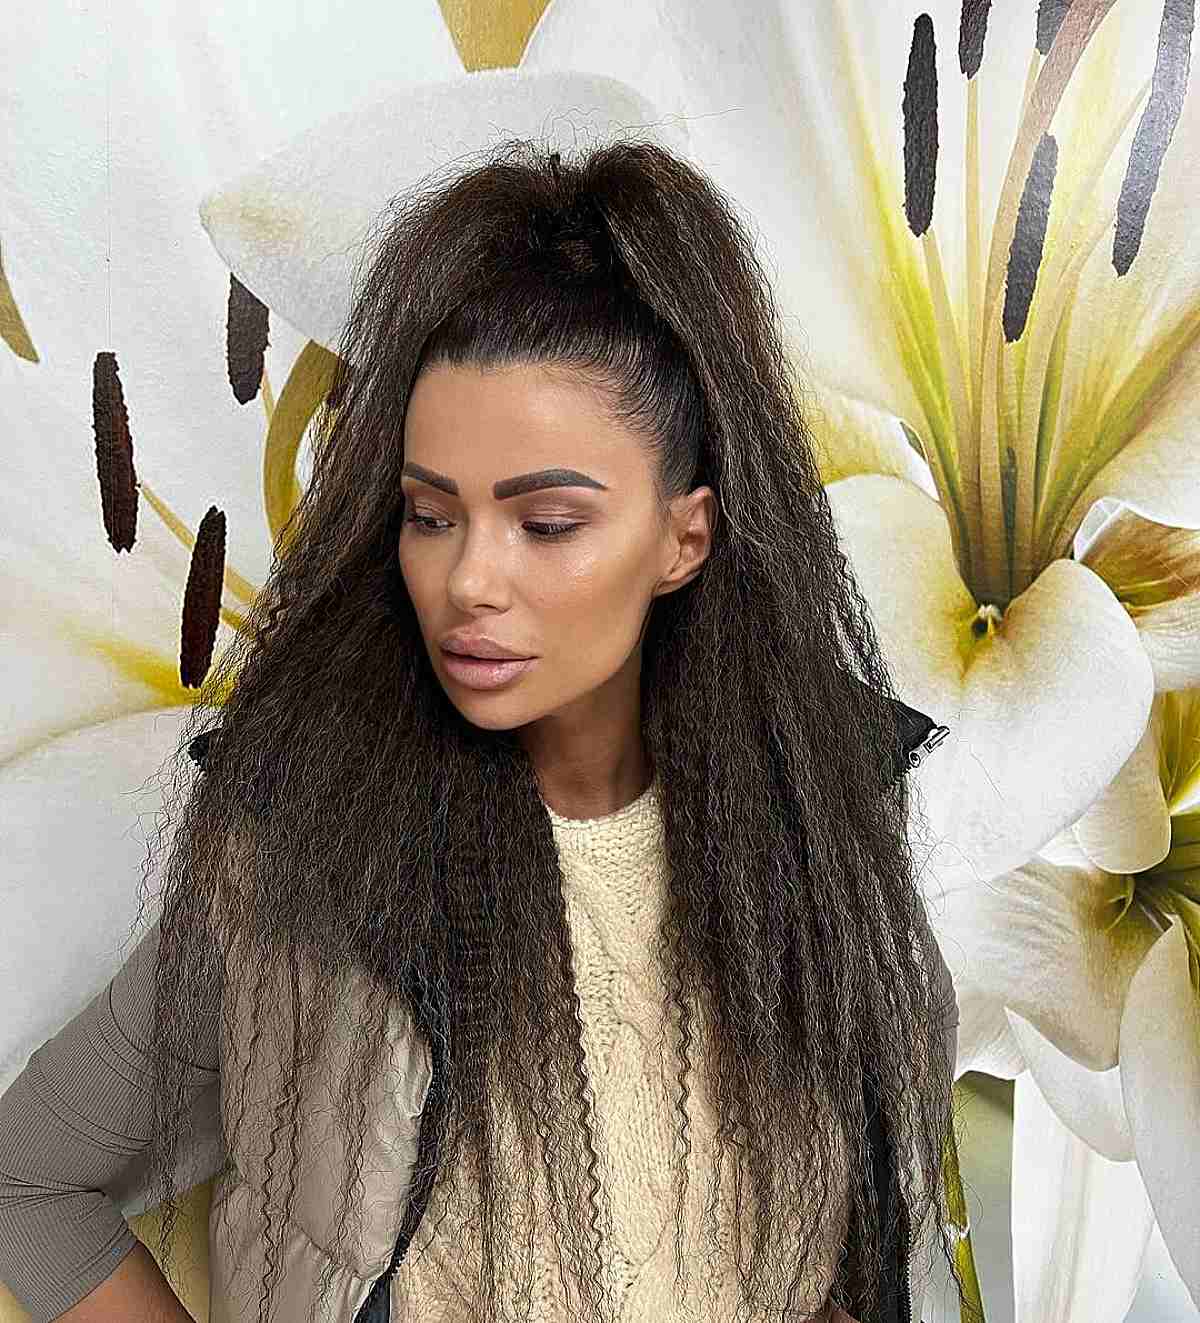 23 Modern Ways to Style Crimped Hair